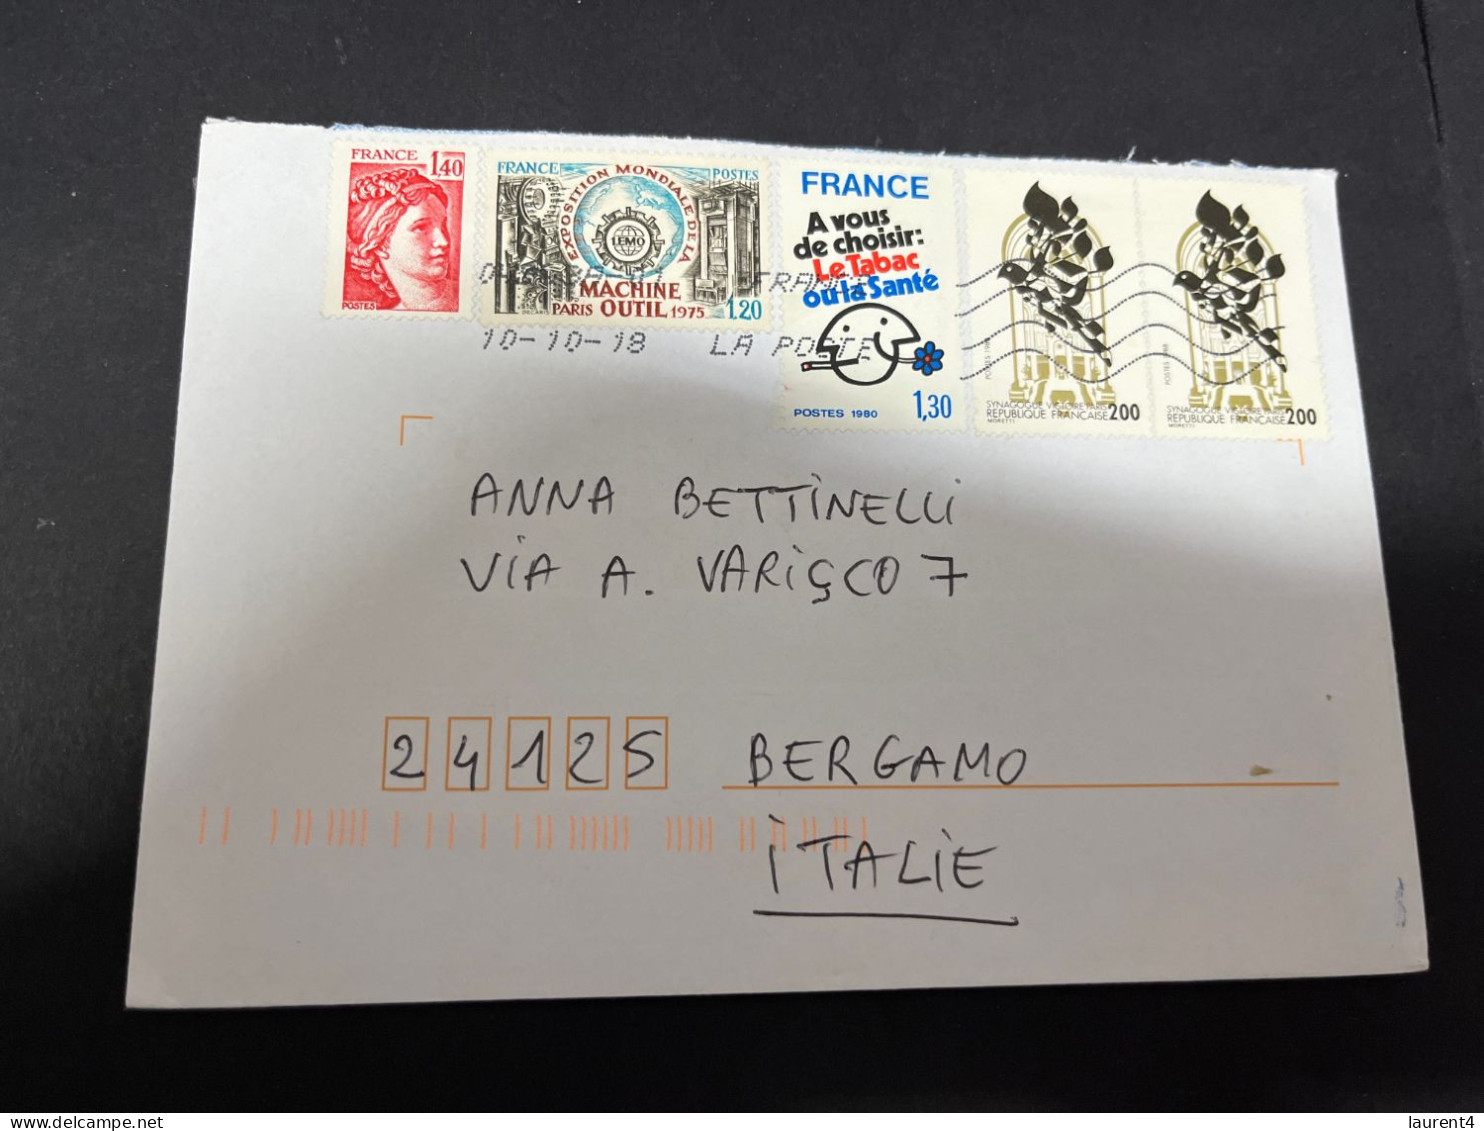 25-3-2024 (4 Y 4) 2 Letter Posted From France To Italy (with Many Stamps - 1 No Postmark) - Lettres & Documents